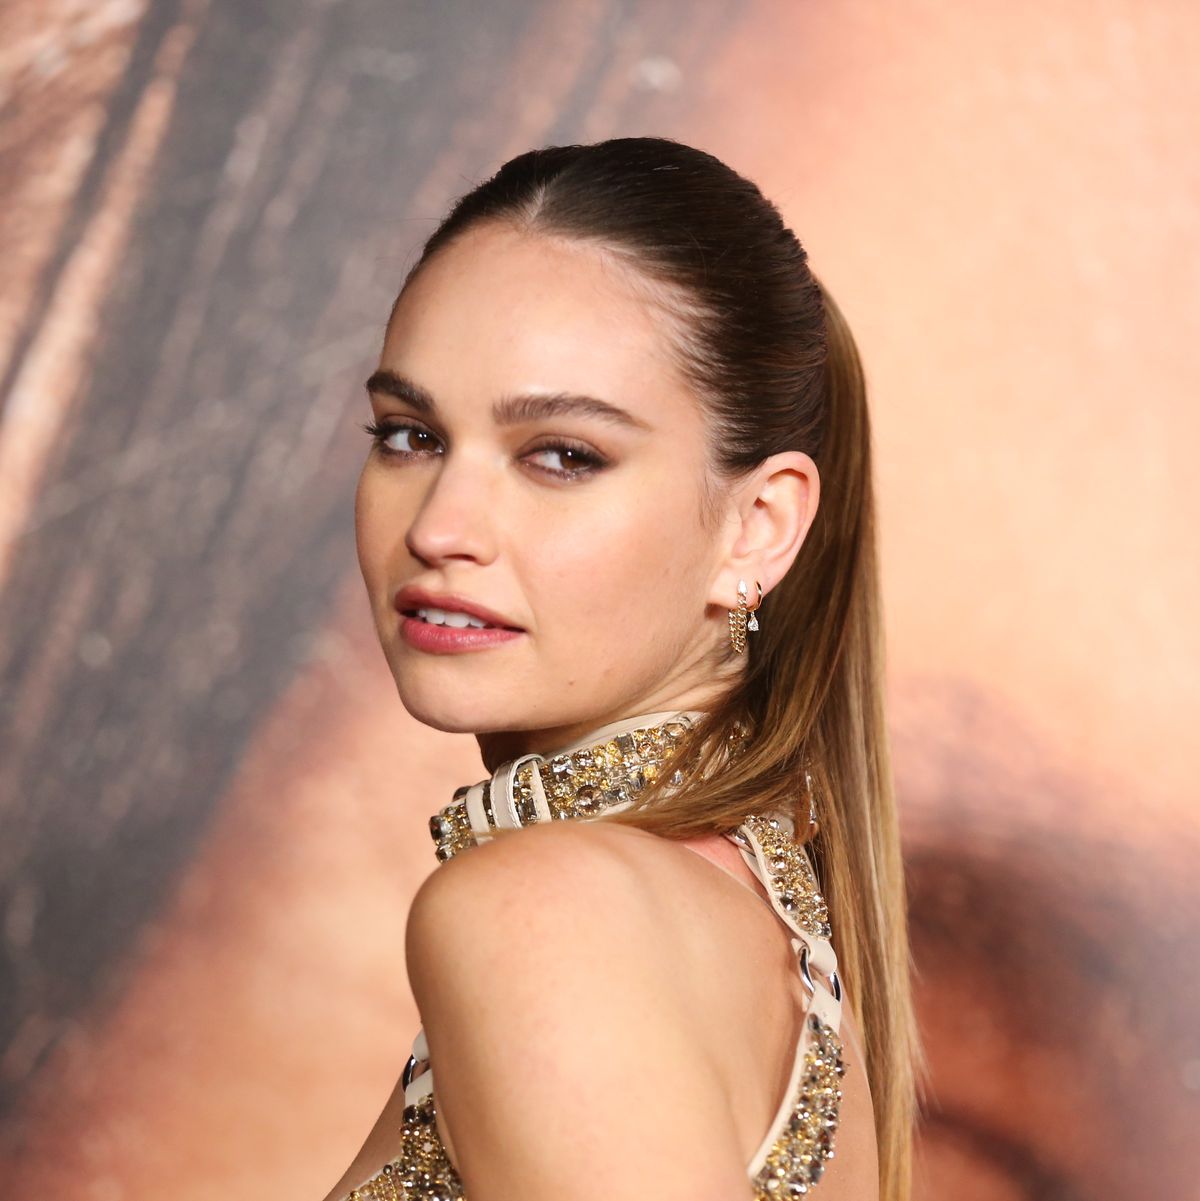 All Natural Chick Lily - Lily James on the mood-boosting benefits of make-up